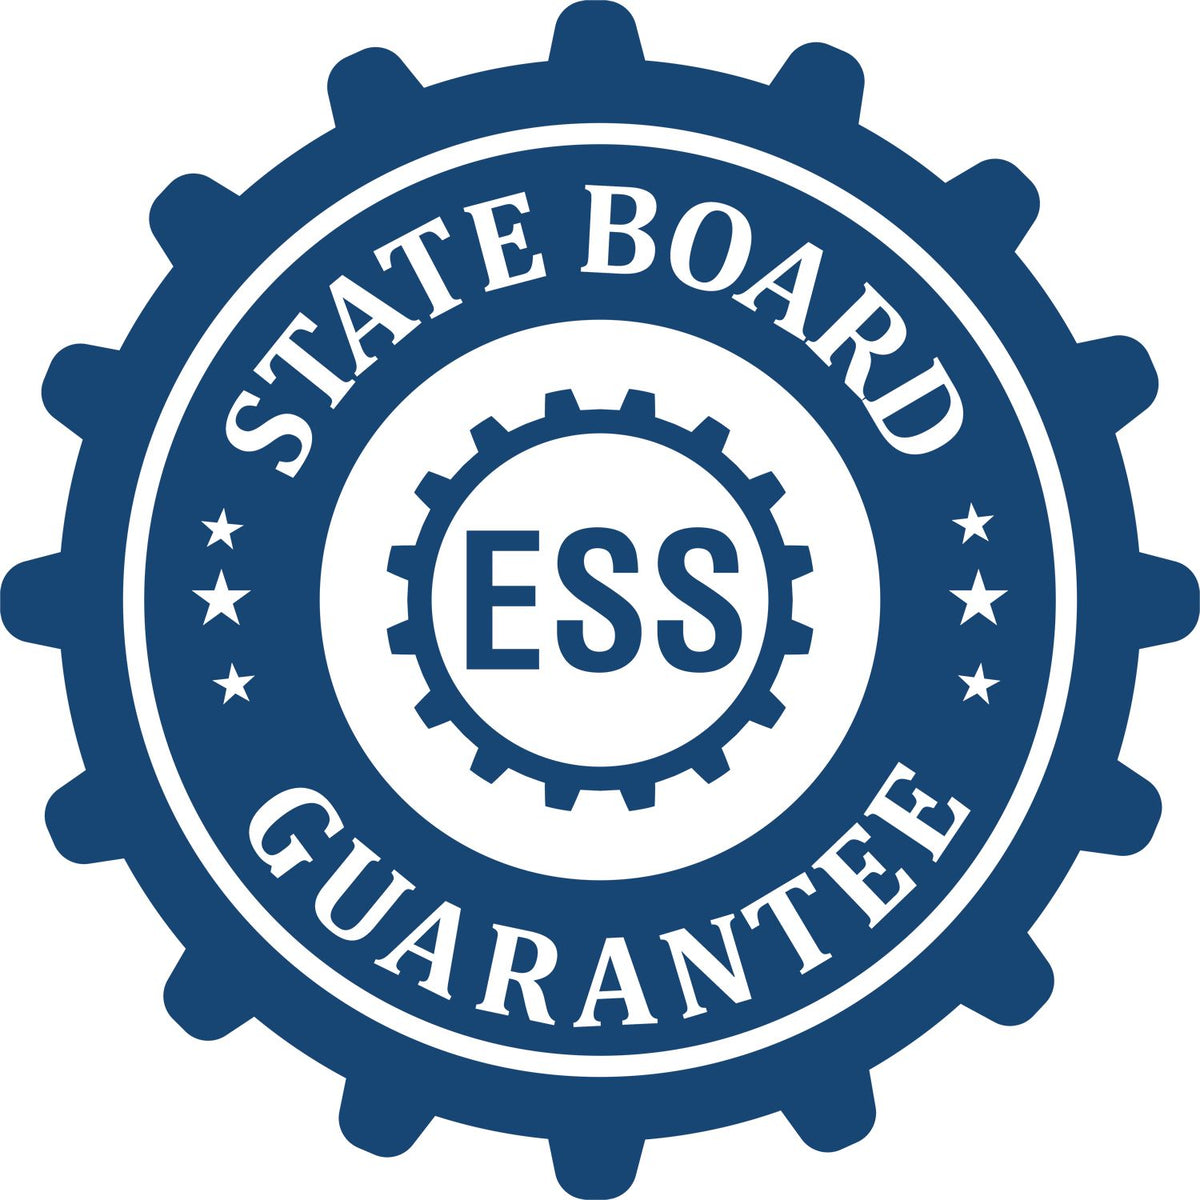 An emblem in a gear shape illustrating a state board guarantee for the Handheld Louisiana Professional Geologist Embosser